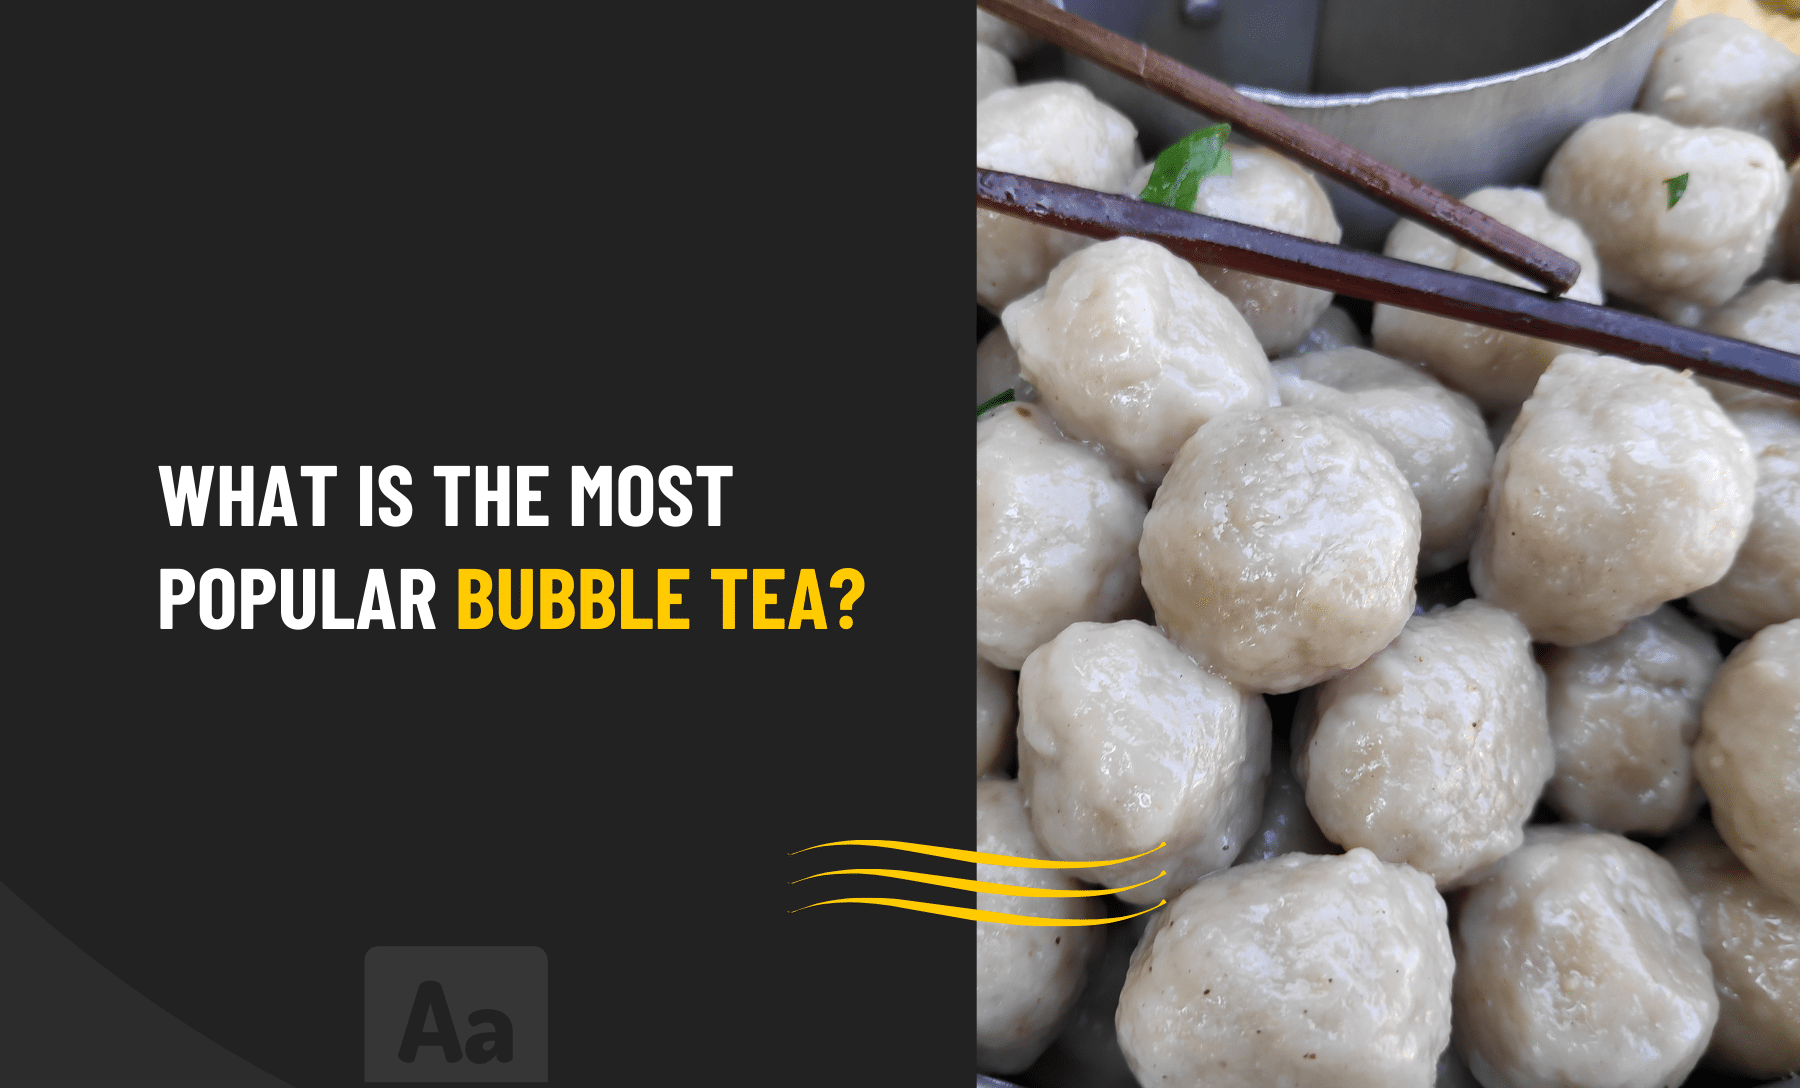 What is the most popular bubble tea